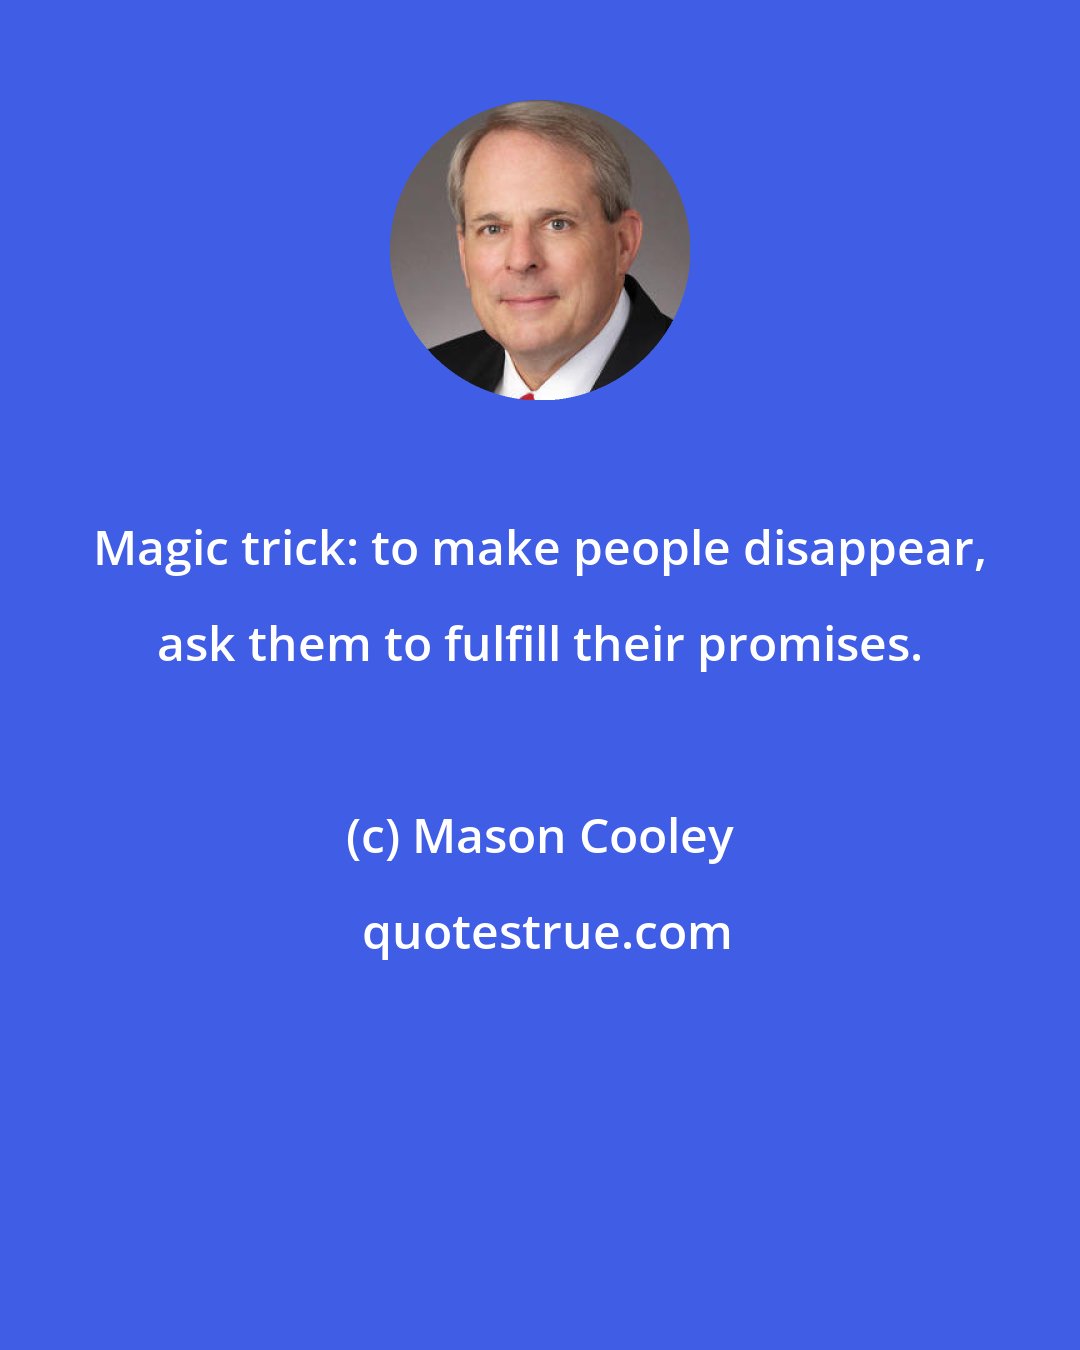 Mason Cooley: Magic trick: to make people disappear, ask them to fulfill their promises.